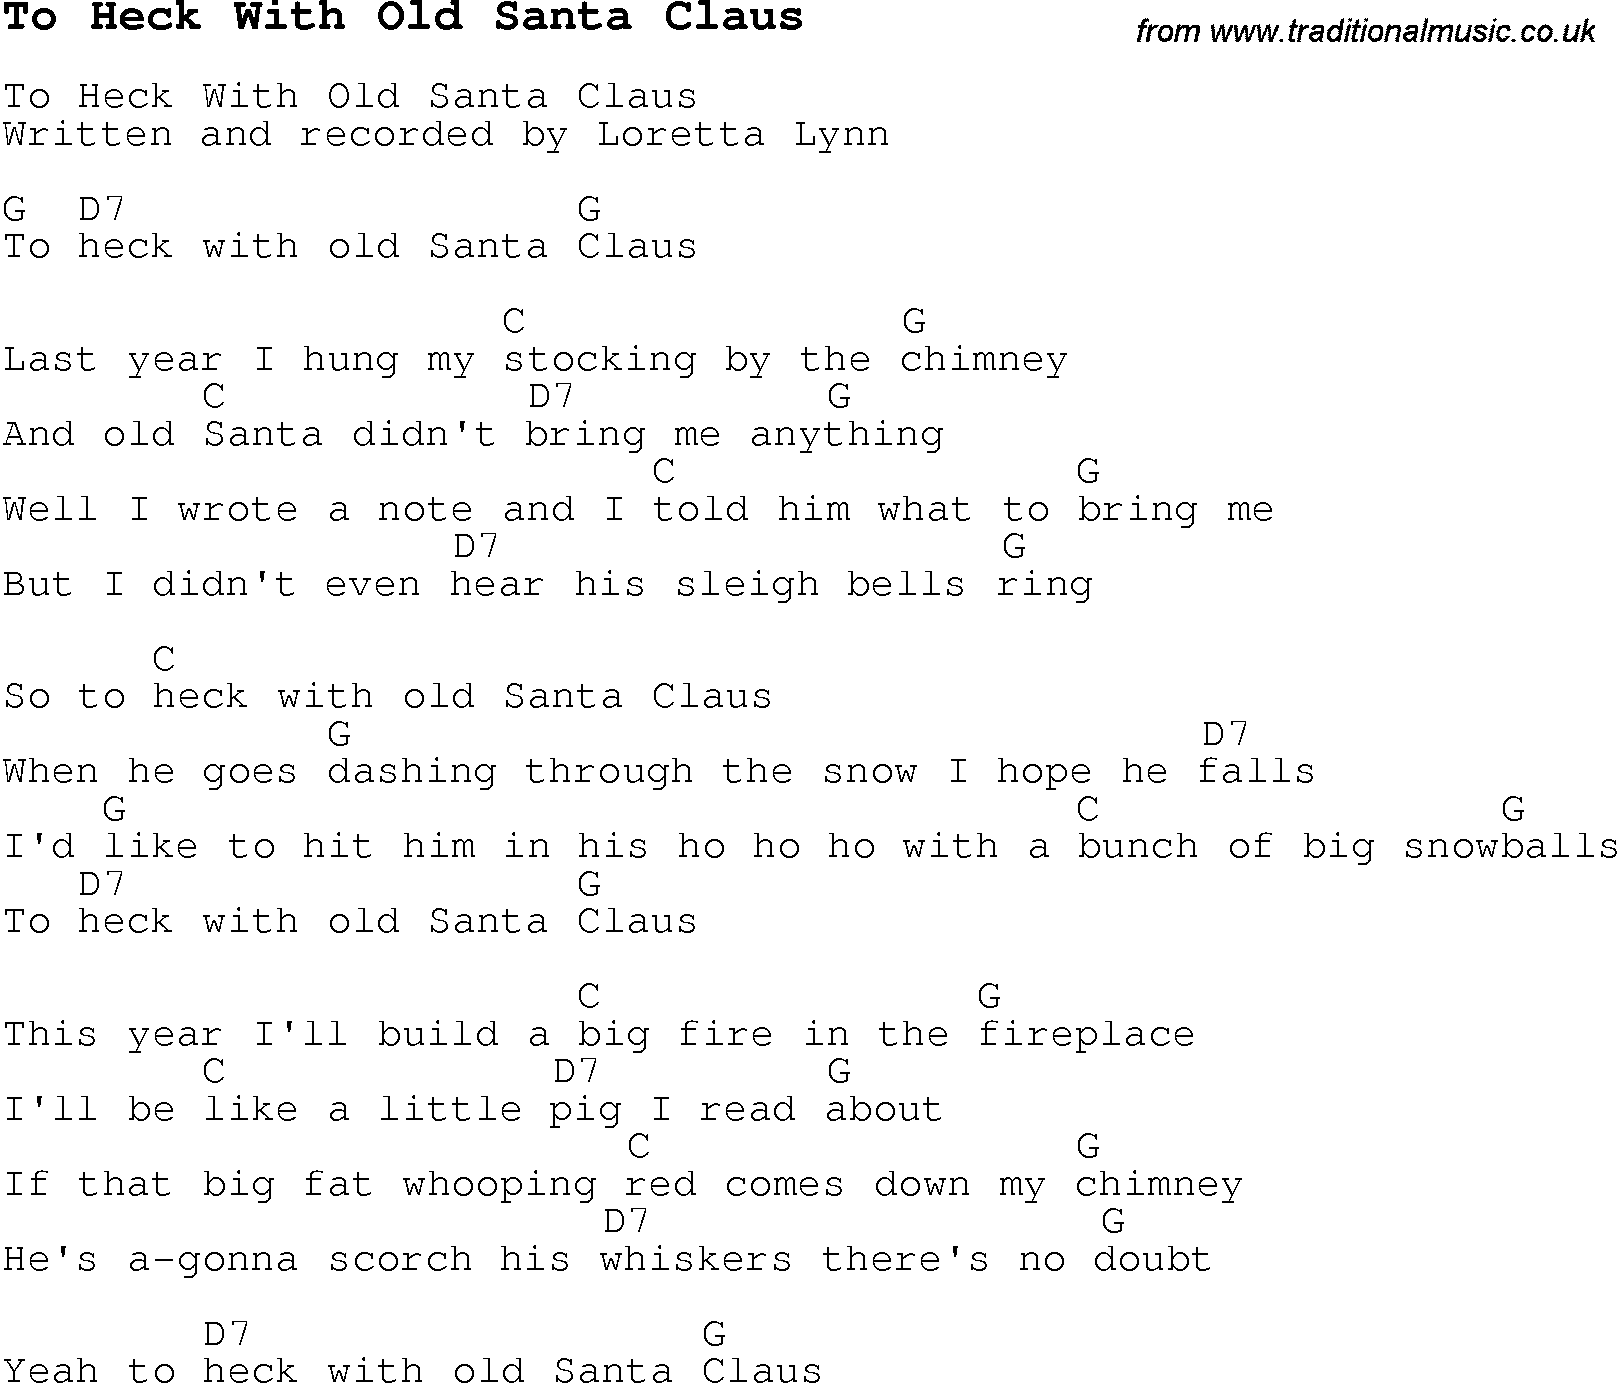 Christmas Songs and Carols, lyrics with chords for guitar banjo for To Heck With Old Santa Claus